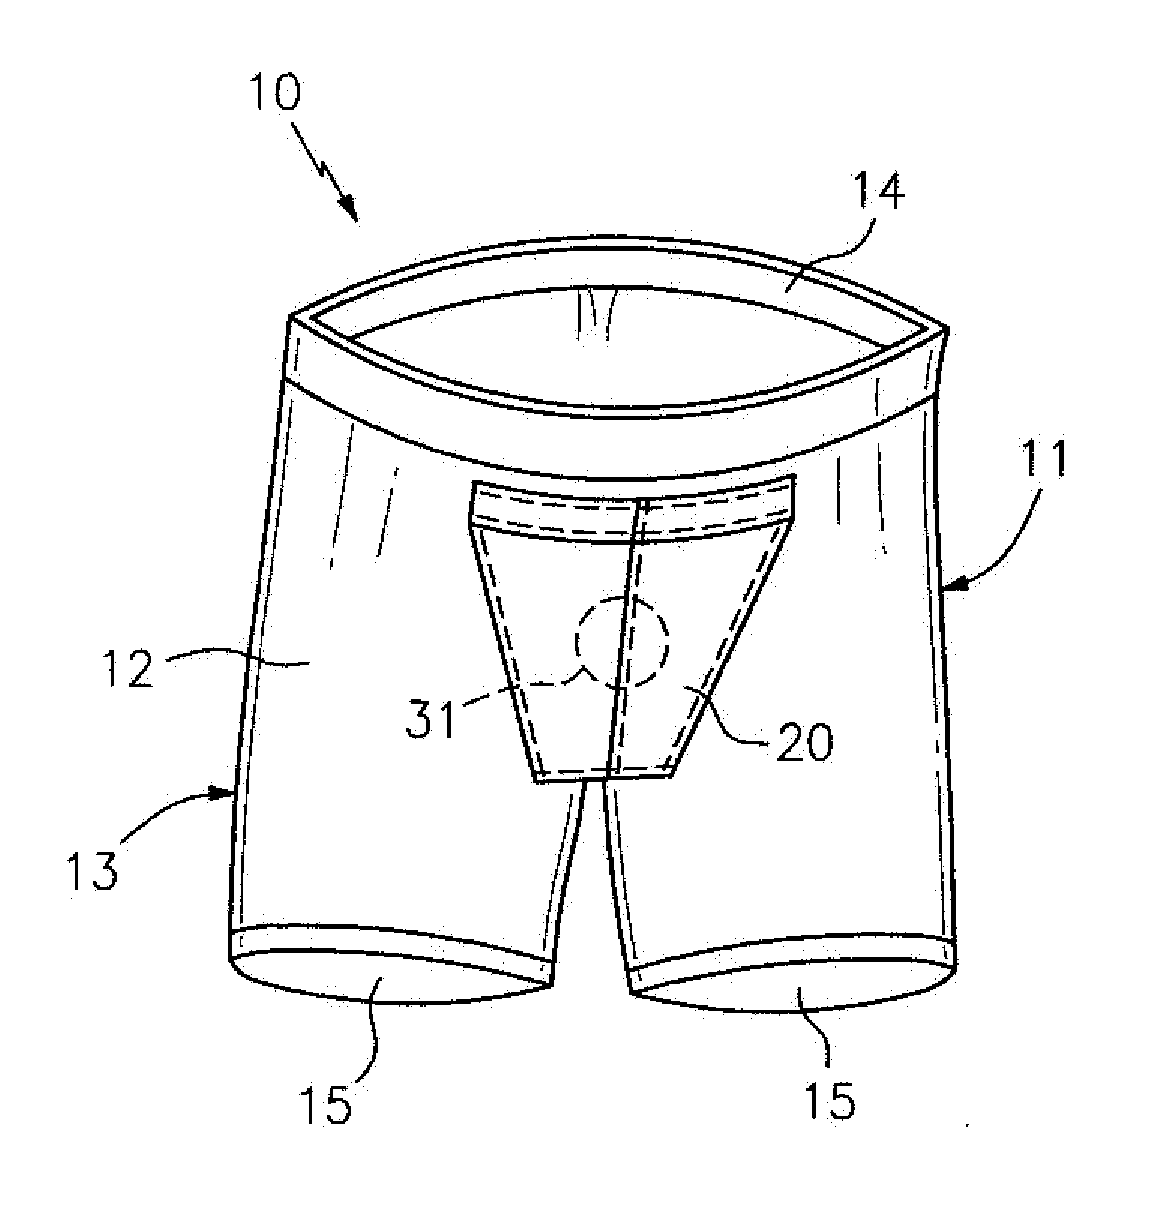 Undergarment with integrated support apparatus and pouch